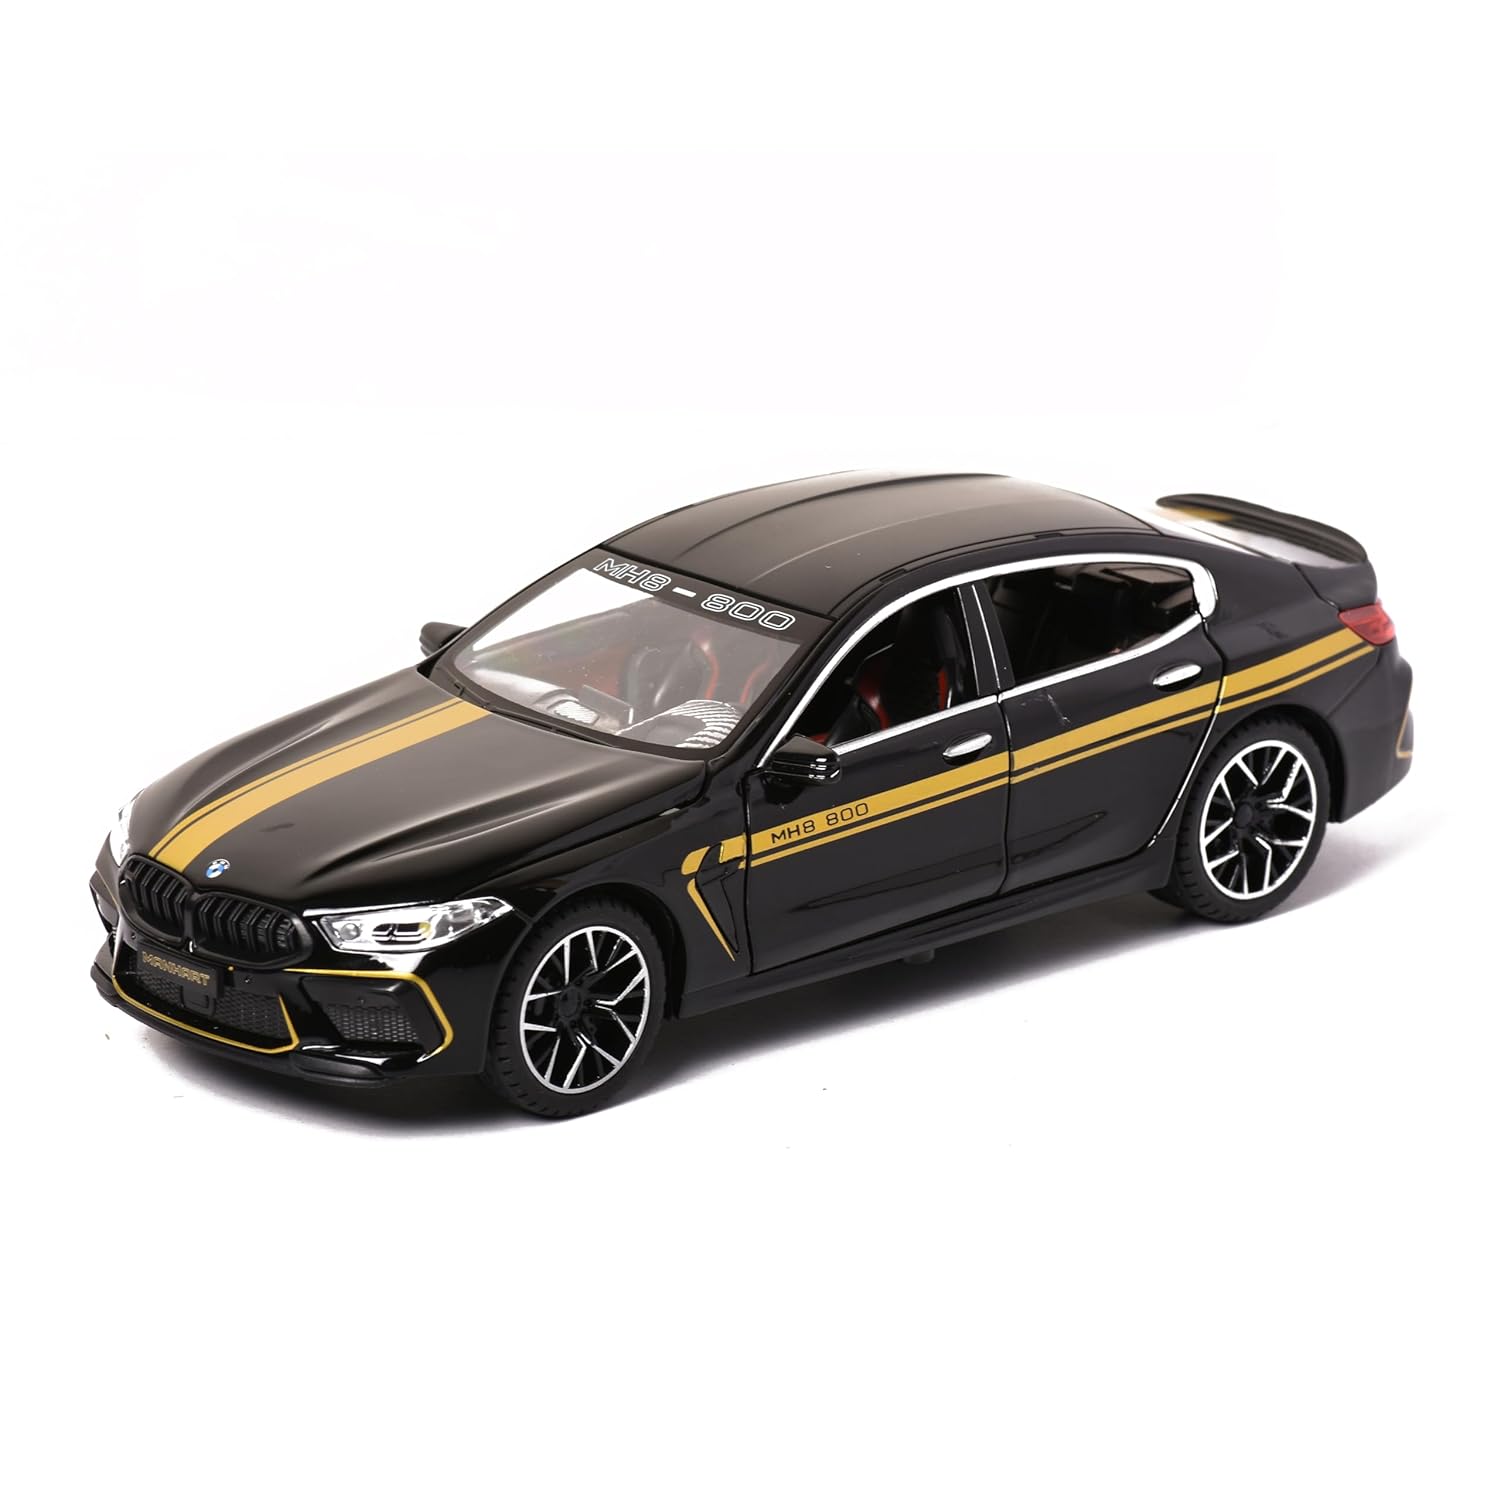 Braintastic Model Diecast Car Toy Vehicle Pull Back Friction Car with Openable Doors Light & Music Toys for Kids Age 3+ Years (BMW Black)